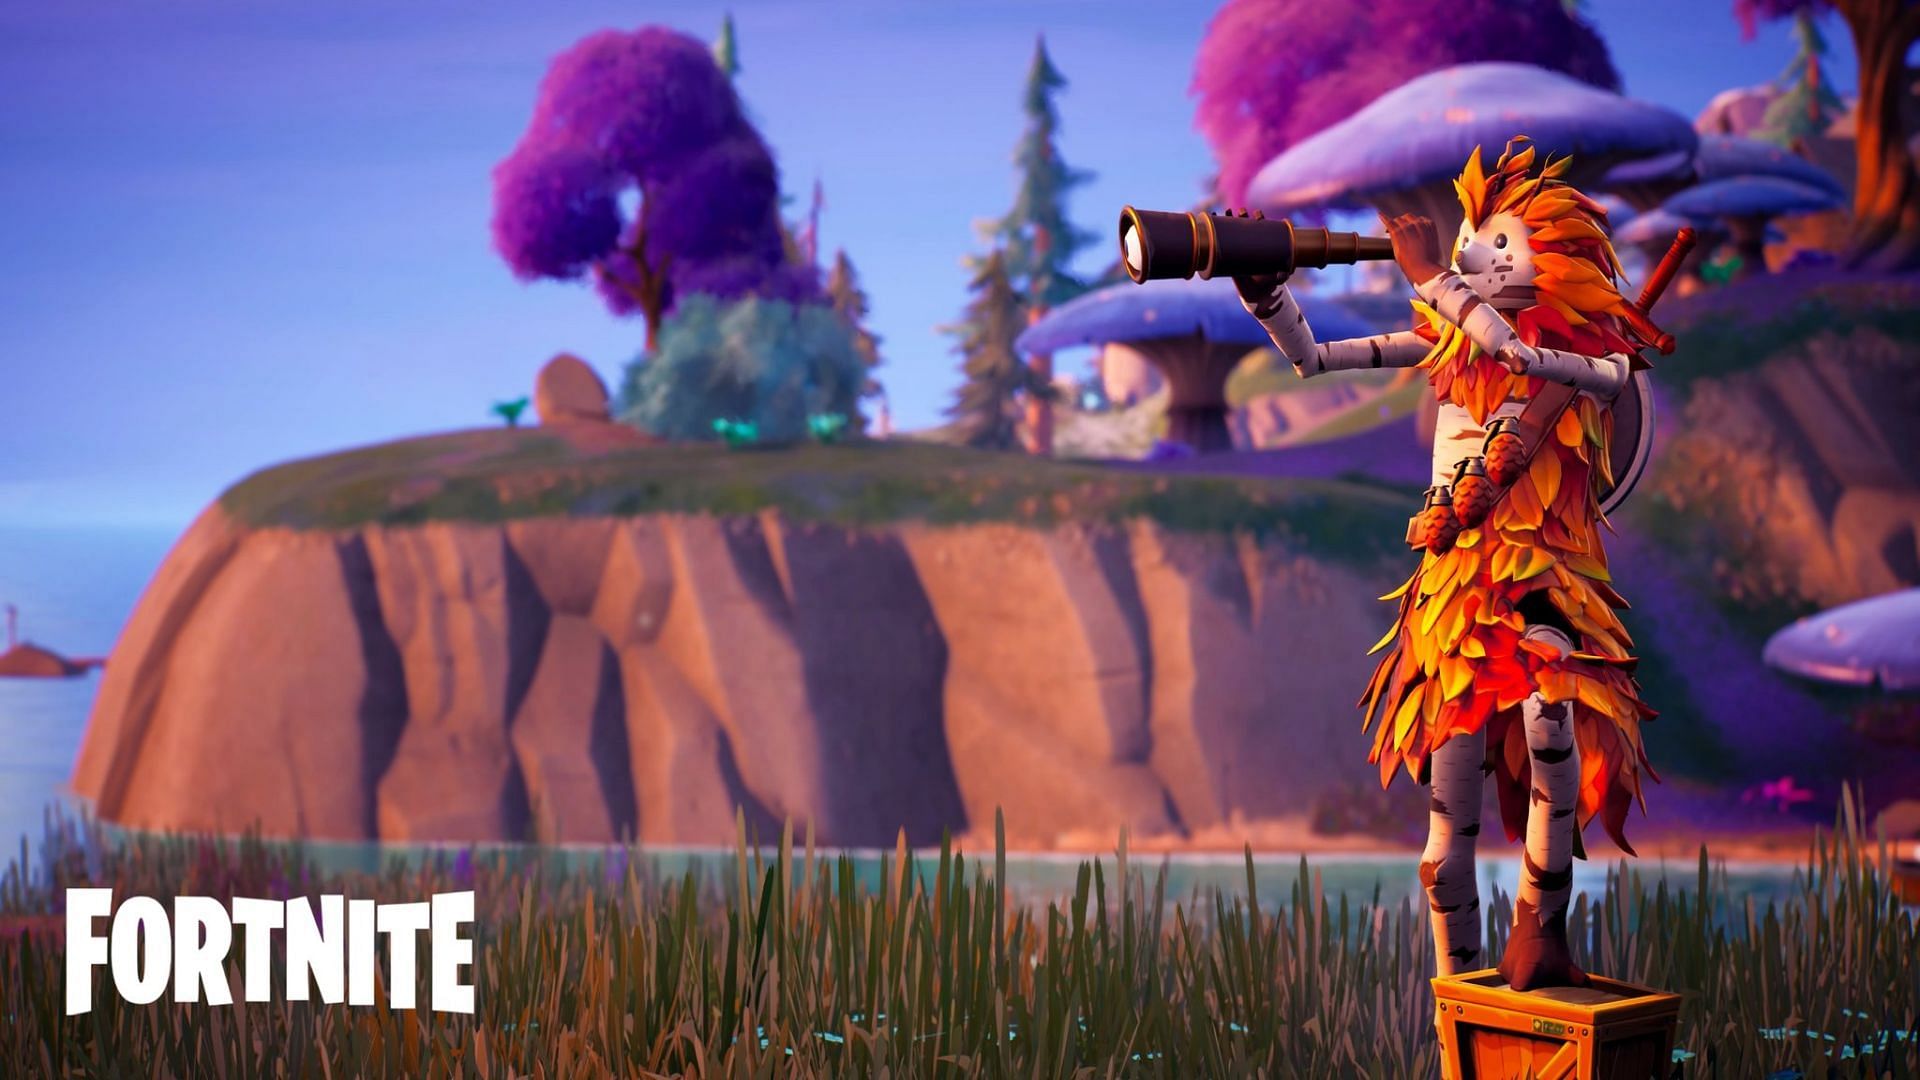 Looking for credible Fortnite leaks is a tough job (Image via Twitter/MightyMishok)